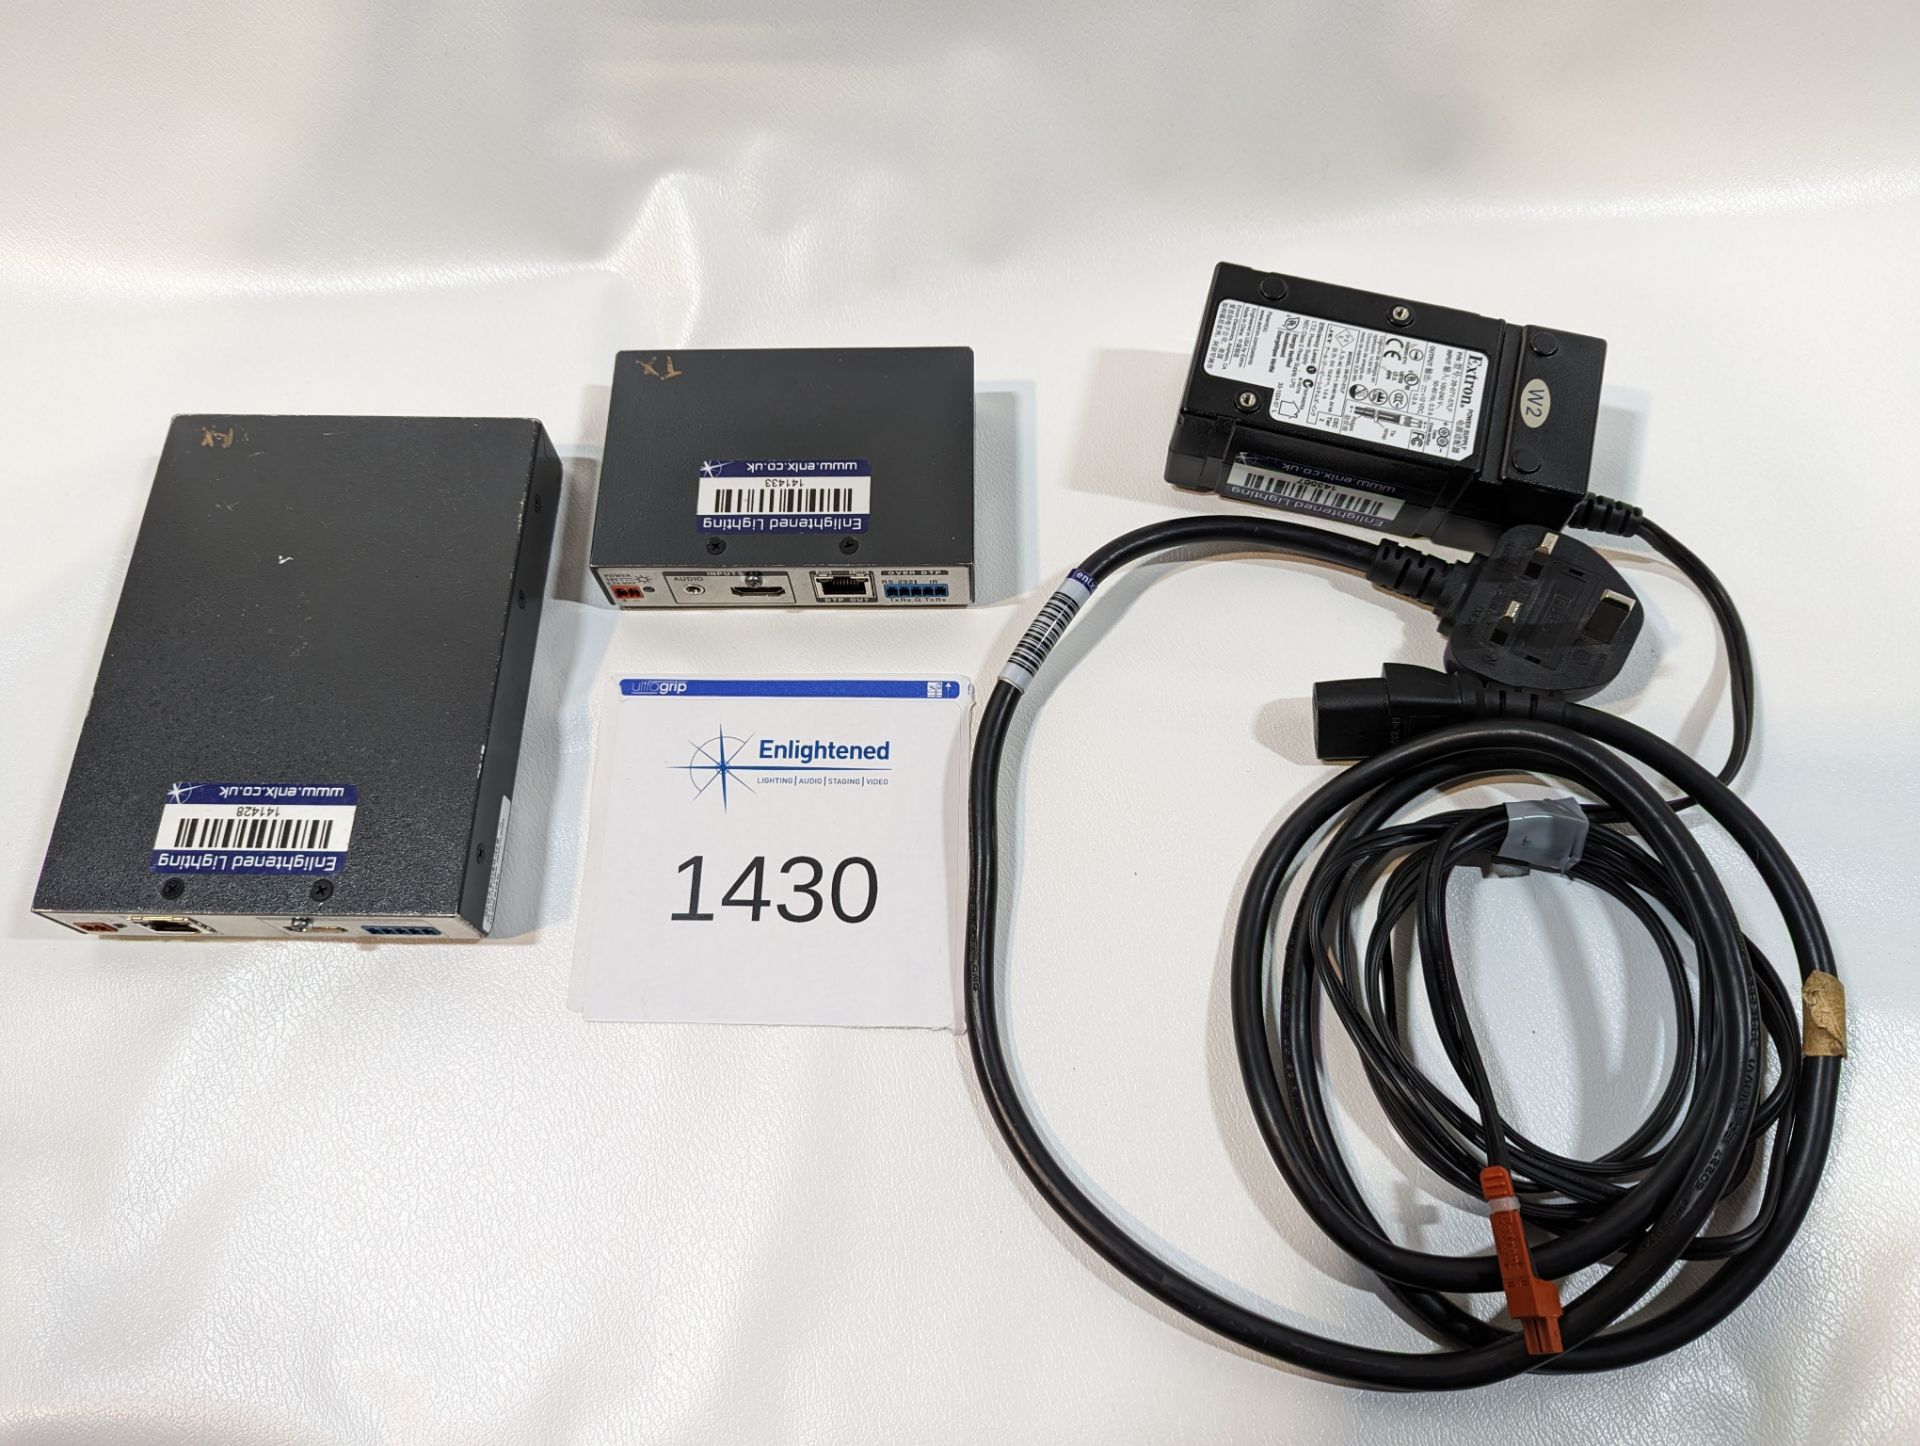 Extron hdmi over cat 5 kits - Image 4 of 4